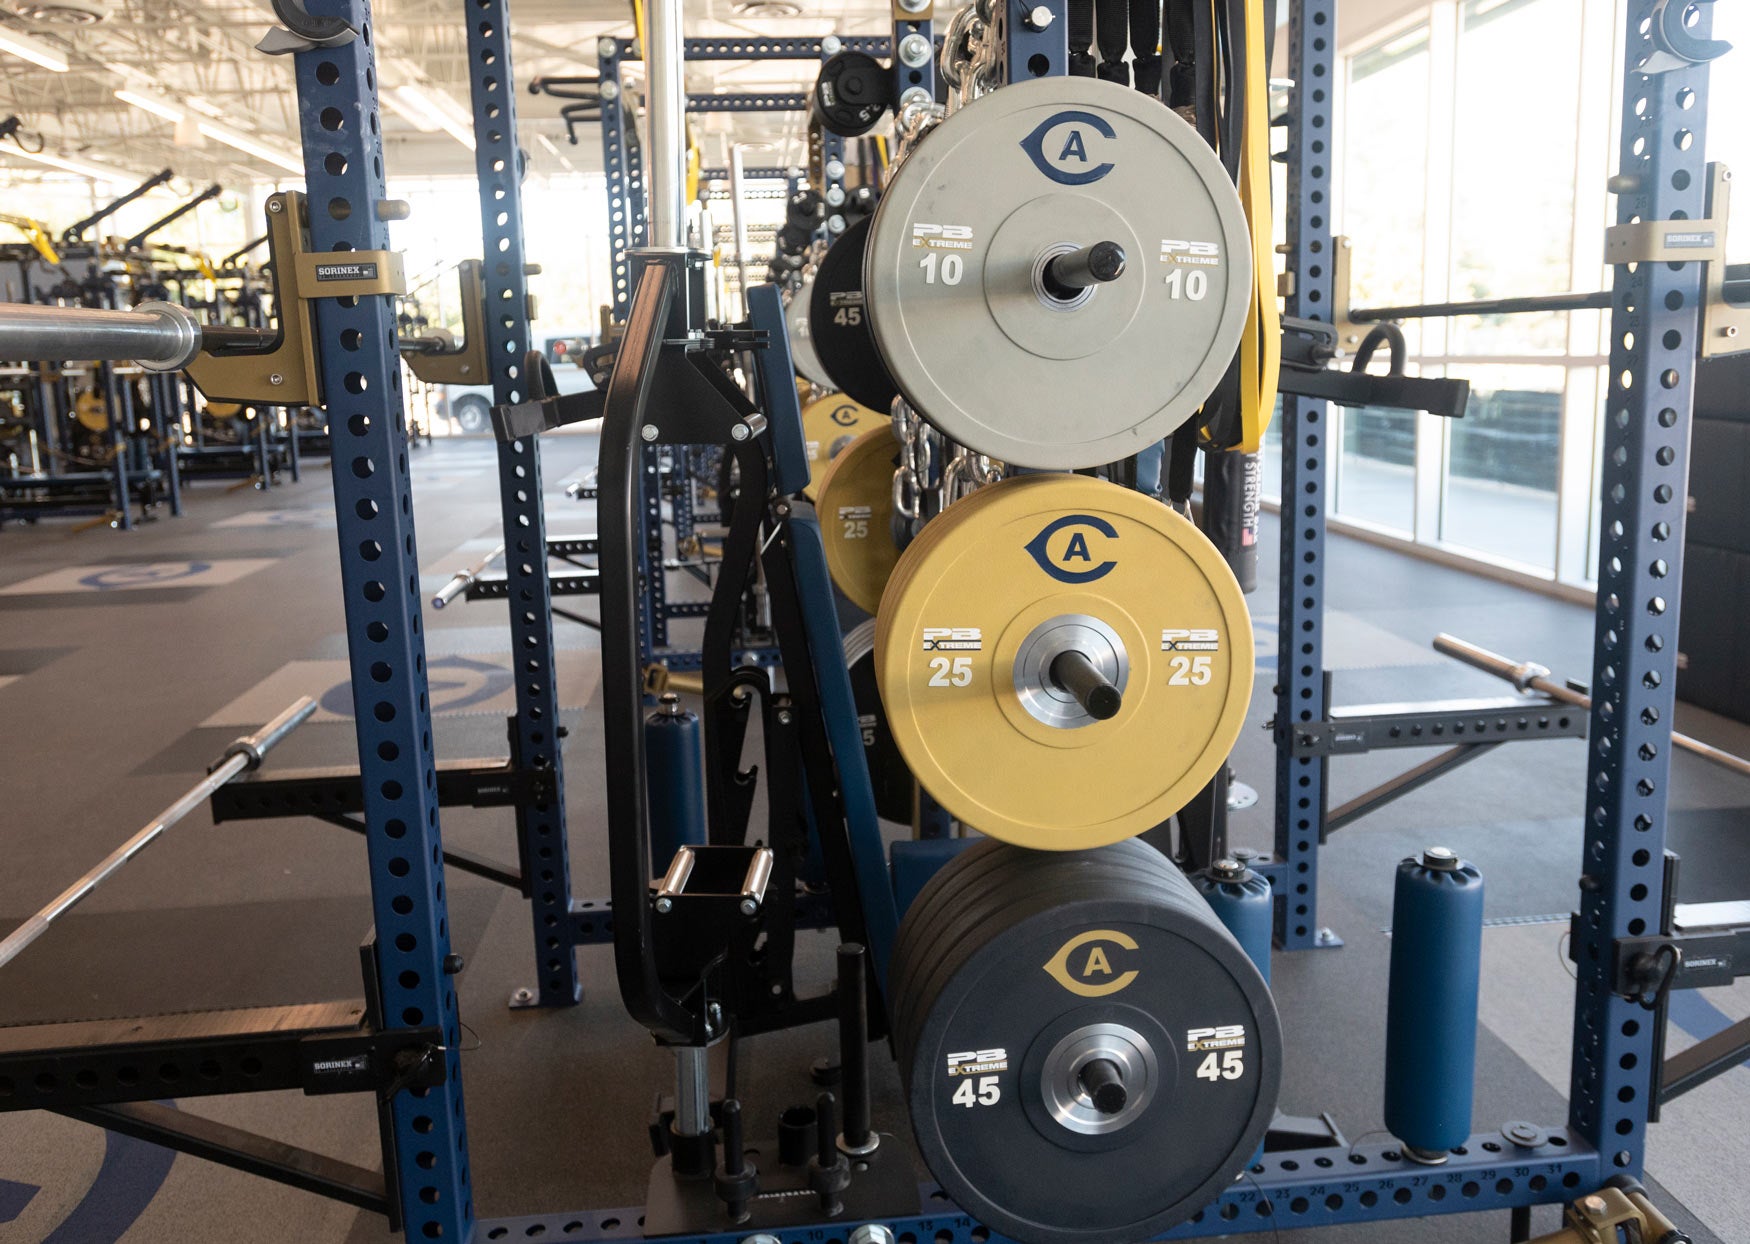 Closeup of weights in blue, gold and gray with "CA" athletics logo